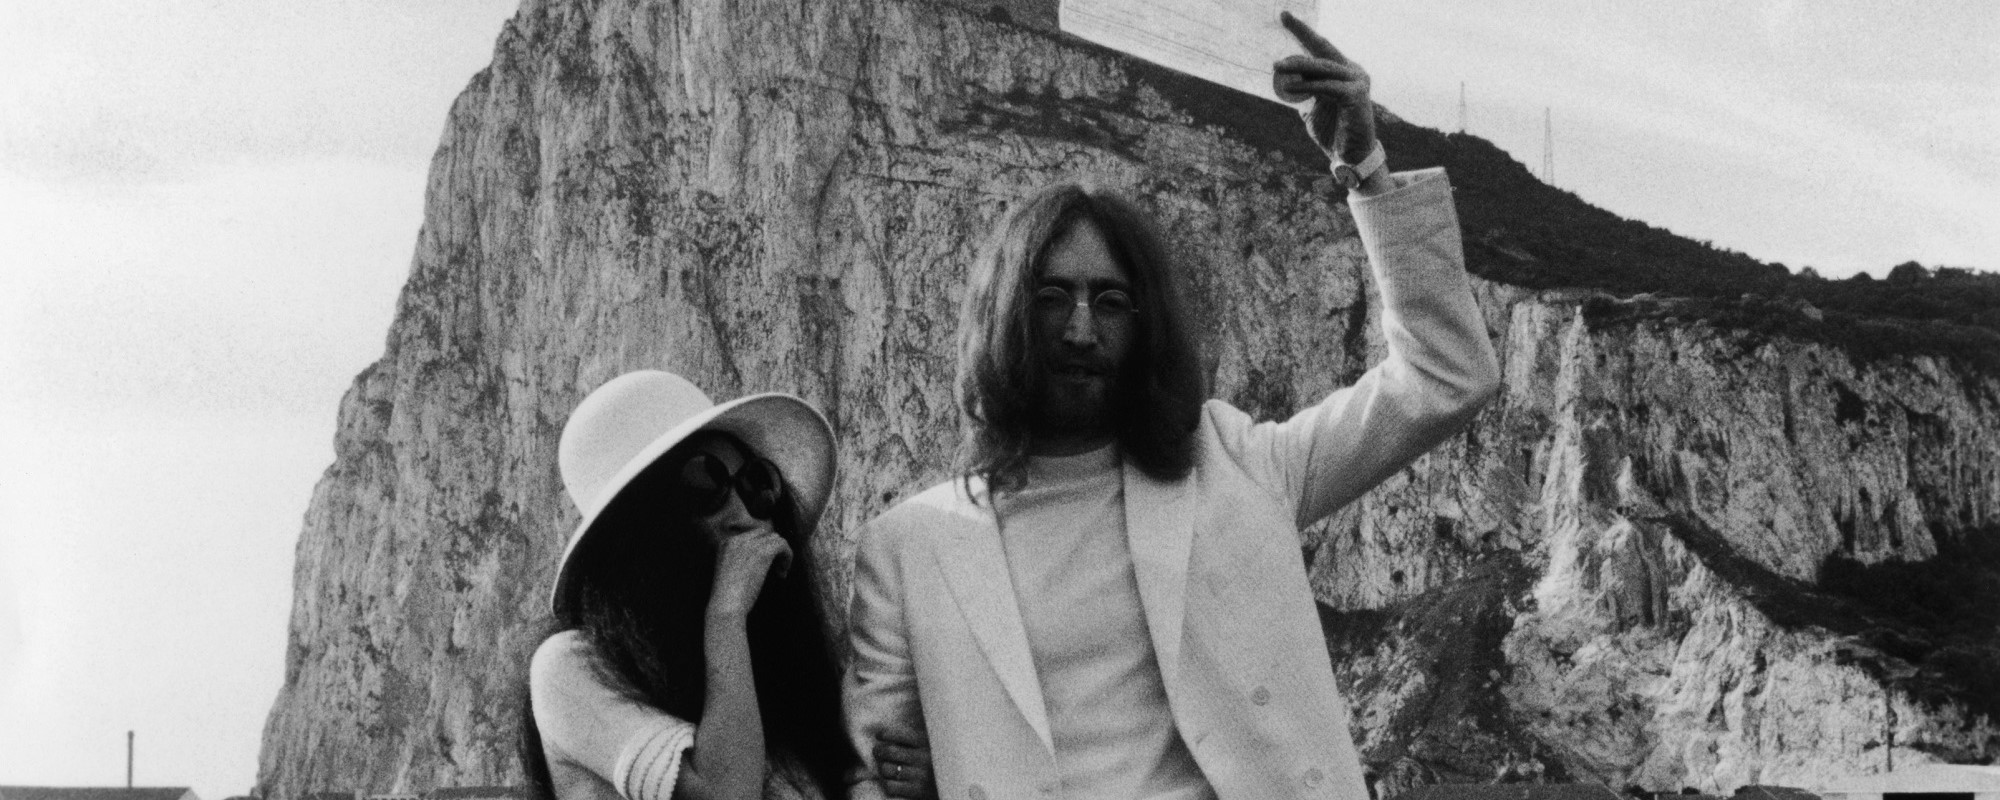 Looking Back at John Lennon and Yoko Ono’s Wedding, Which Took Place 55 Years Ago